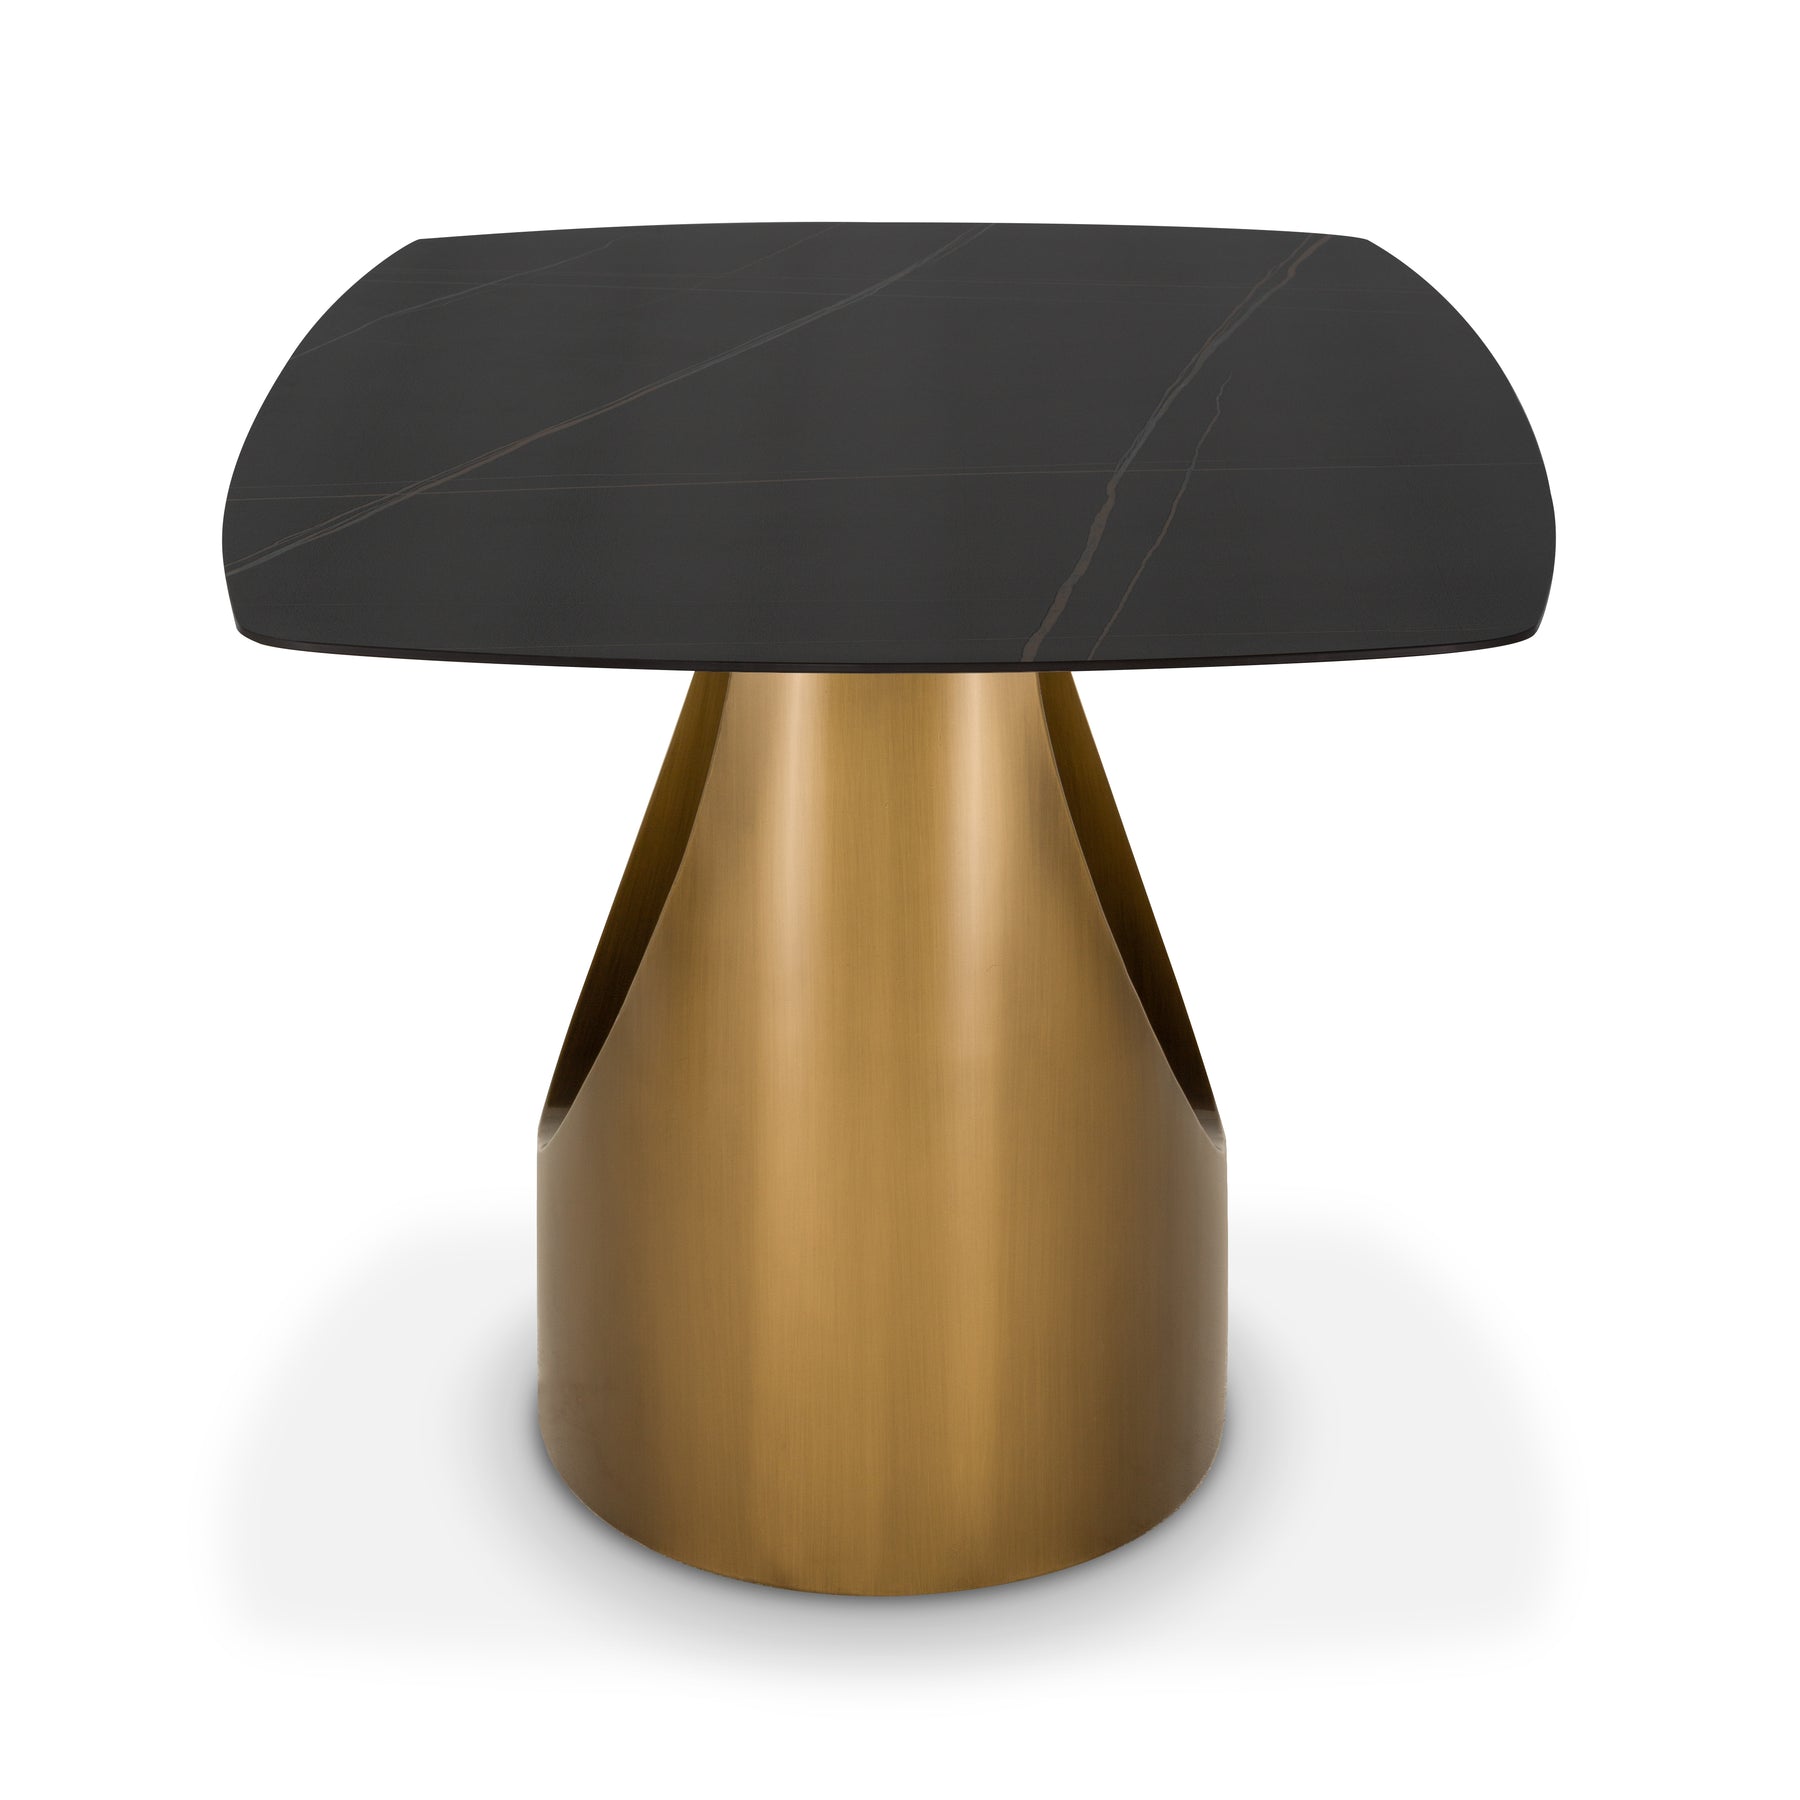 Modern Minimalist Black Dining Table for 4-8,  with Rectangular Sintered Stone Tabletop, Crescent Moon Shape, Titanium Base